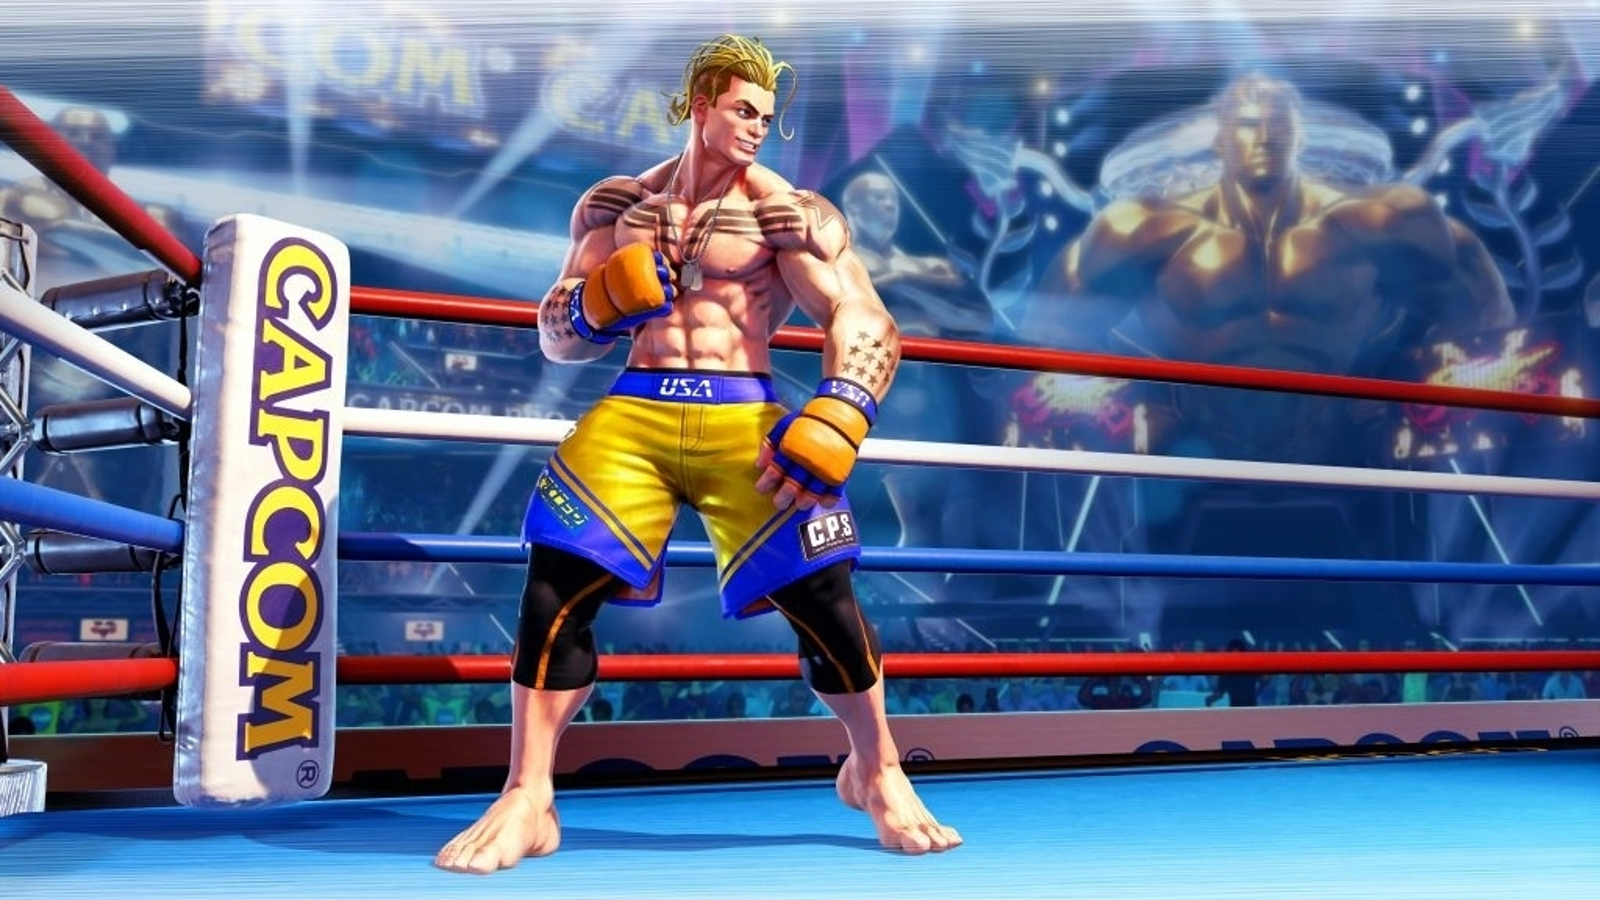 Which five characters will be in Street Fighter 5's final season